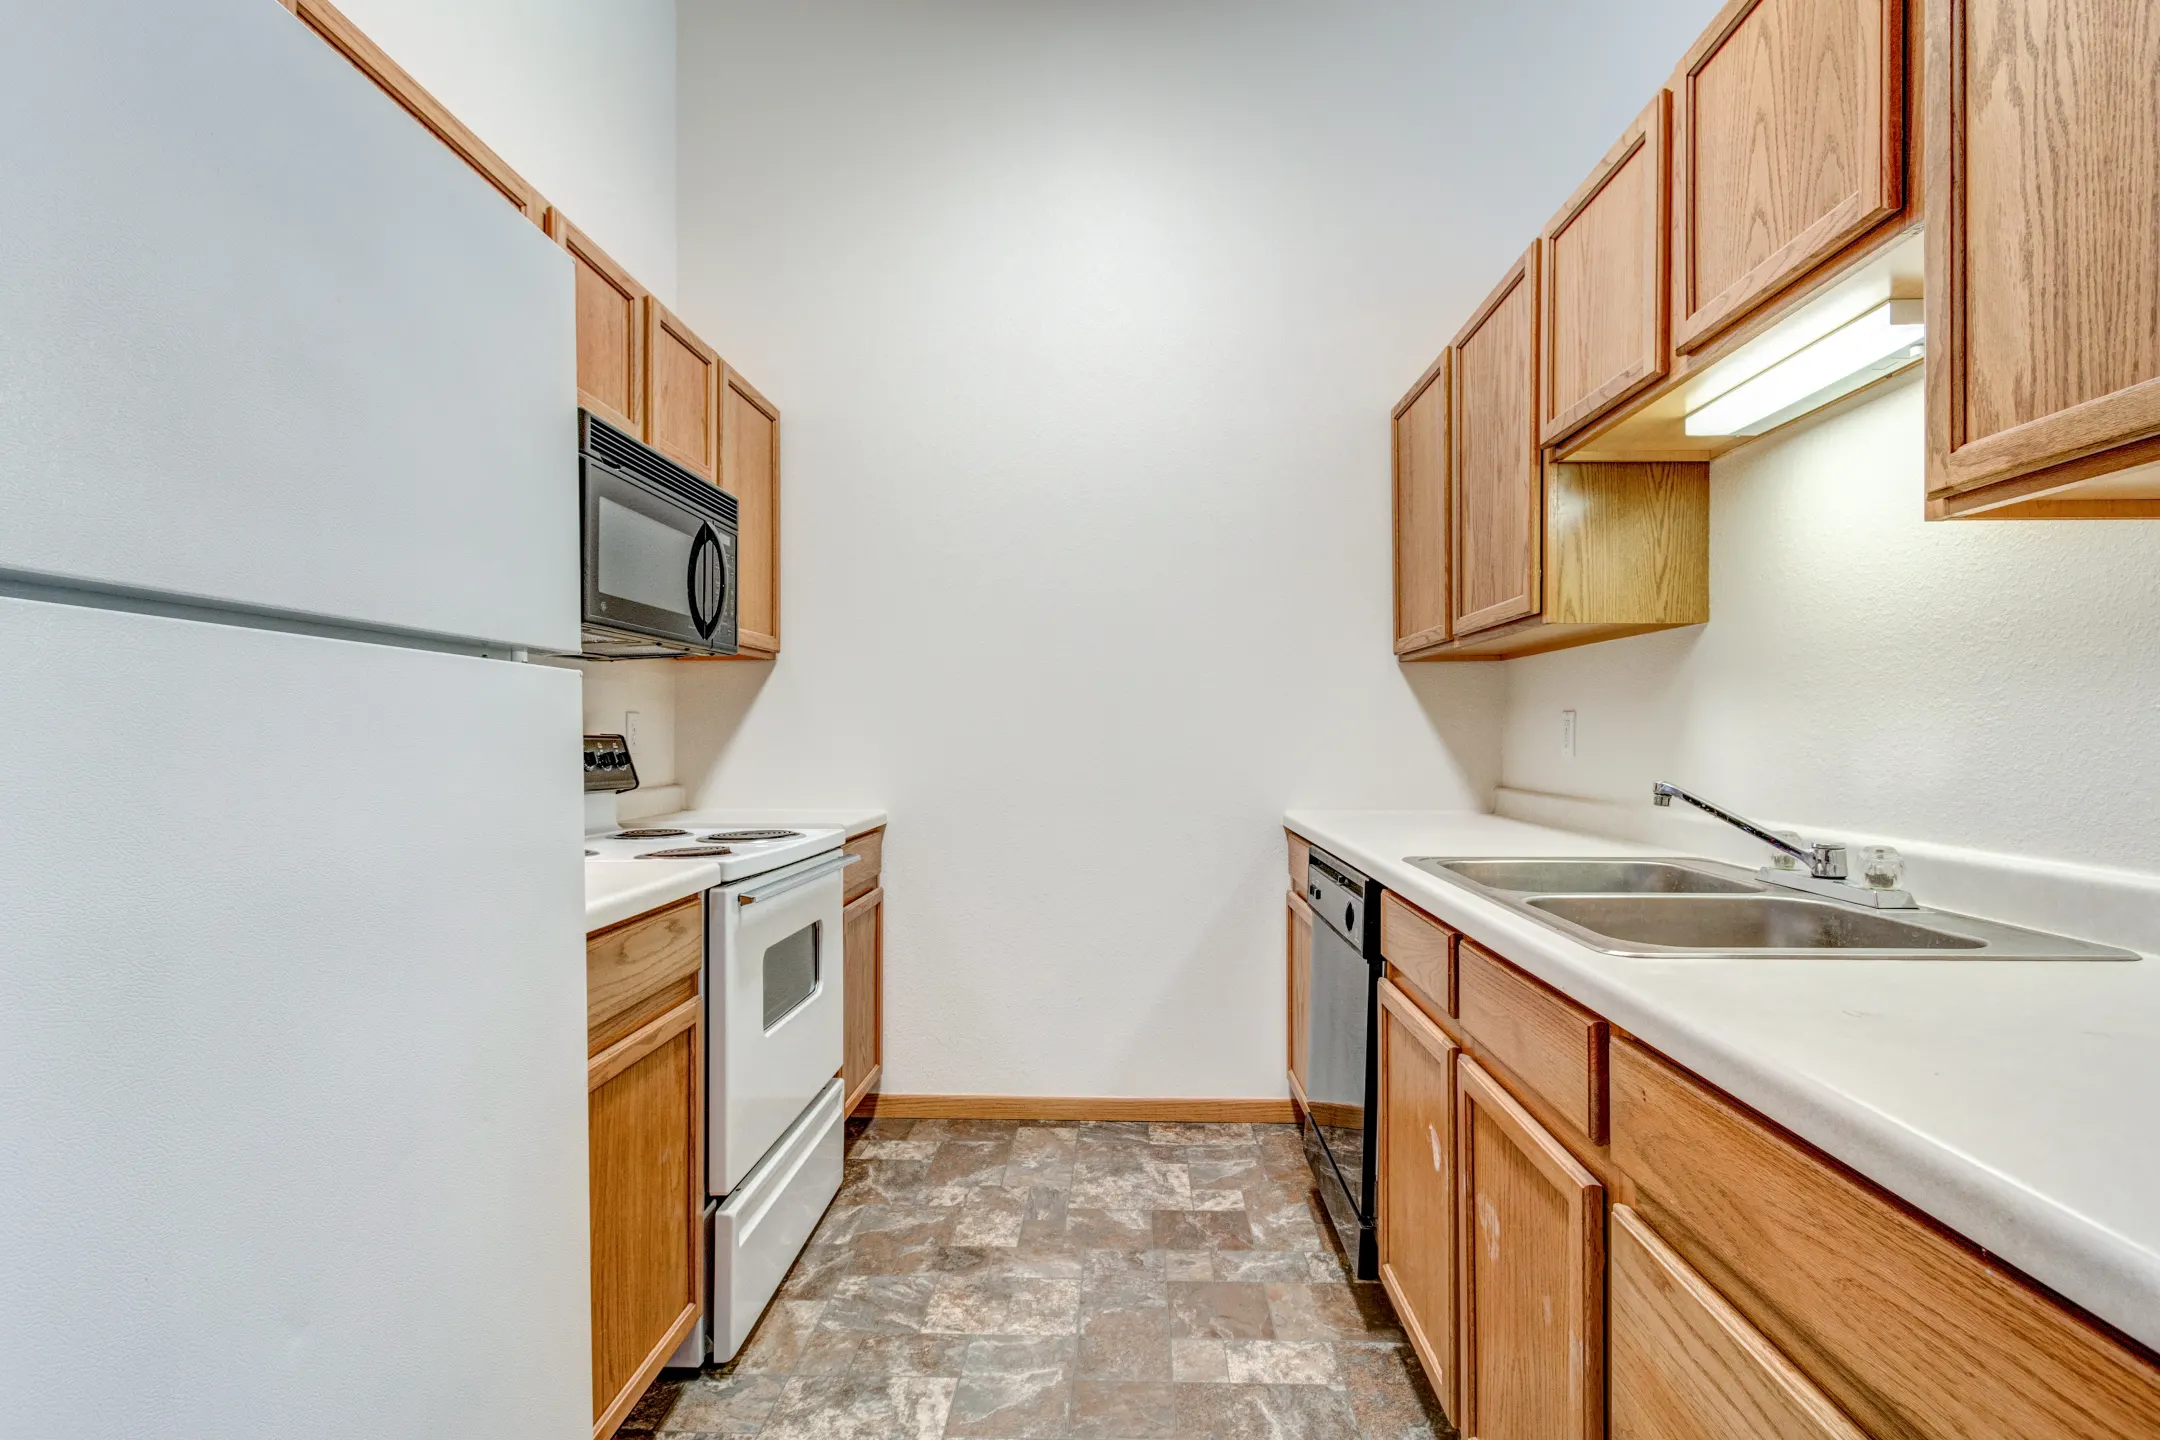 Kitchen - Wheatland Place Apartments & Townhomes - Fargo, ND